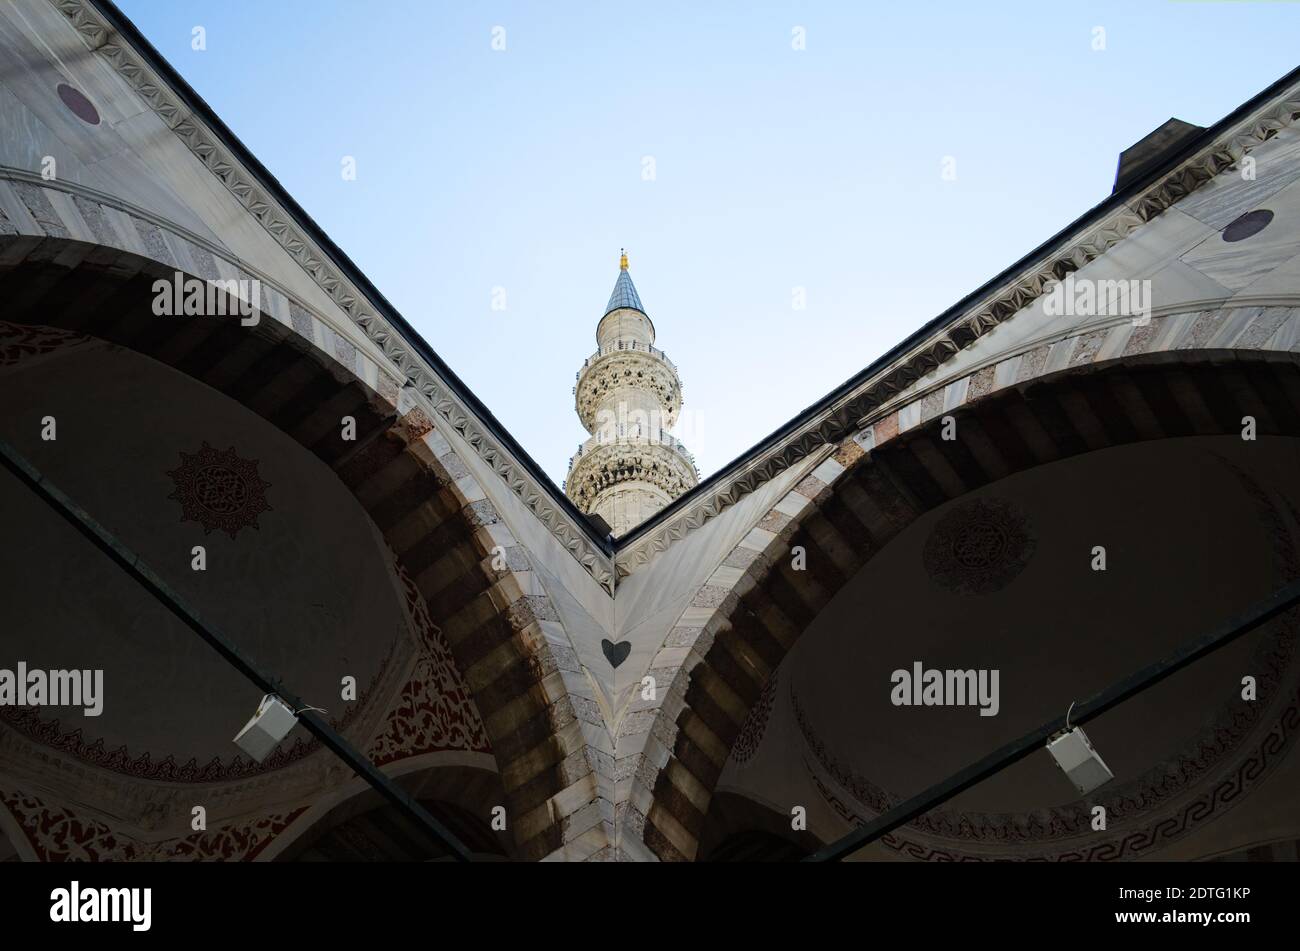 Minaret tower of Blue Mosque against cloudy blue sky with low angle view. Istanbul, Turkey. Stock Photo